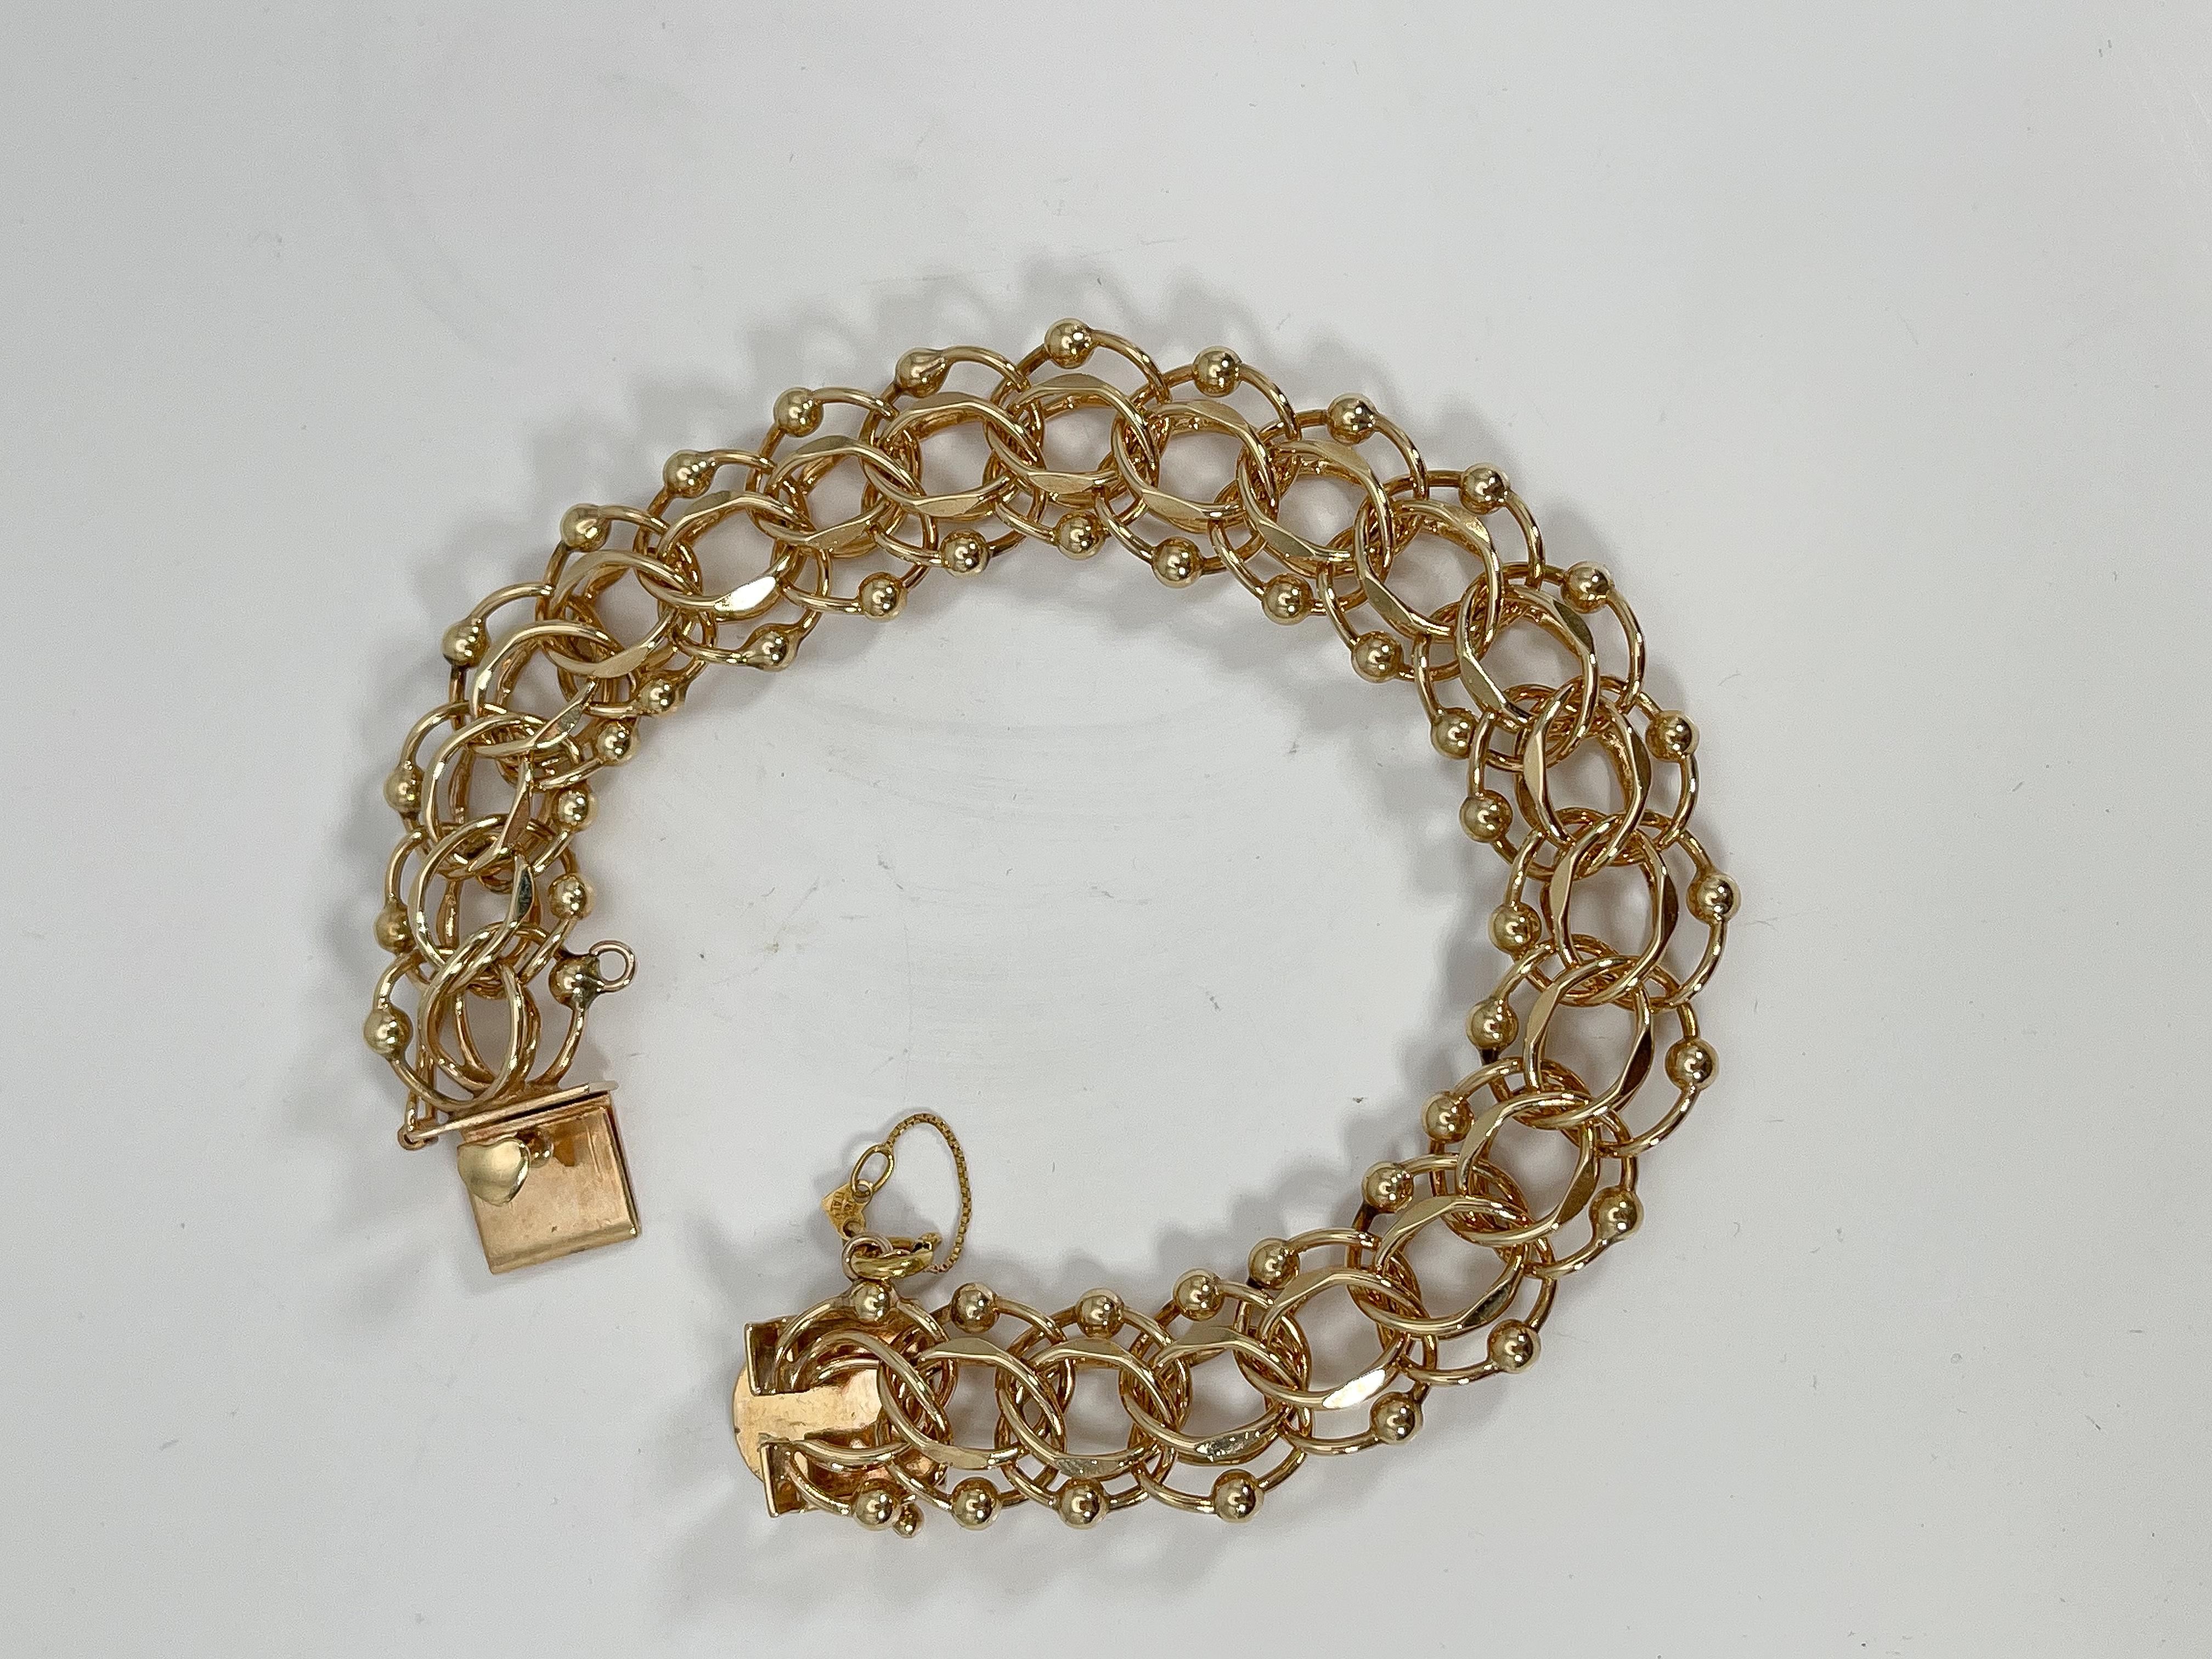 14k yellow gold charm bracelet. This bracelet has a figure 8 clasp to open and close and a safety chain, the width is 14.5 mm, the length is 7.5 inches, and it has a total weight of 30.08 grams.